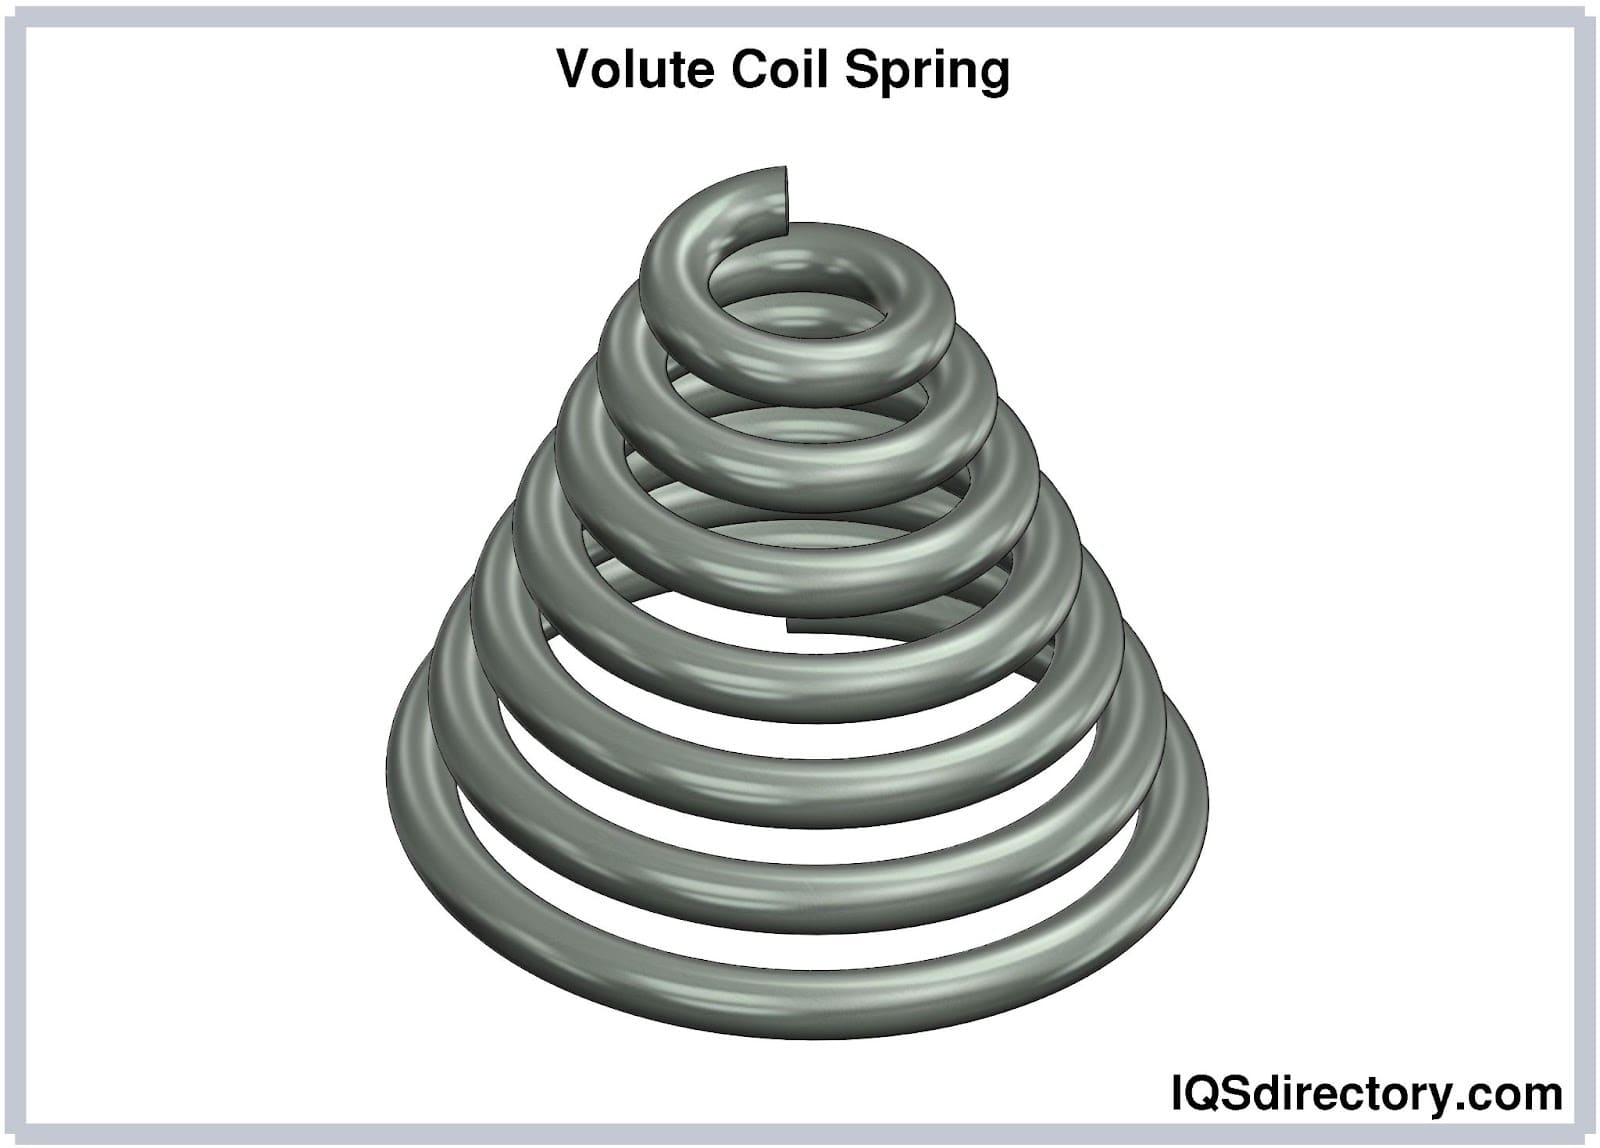 Volute Coil Spring